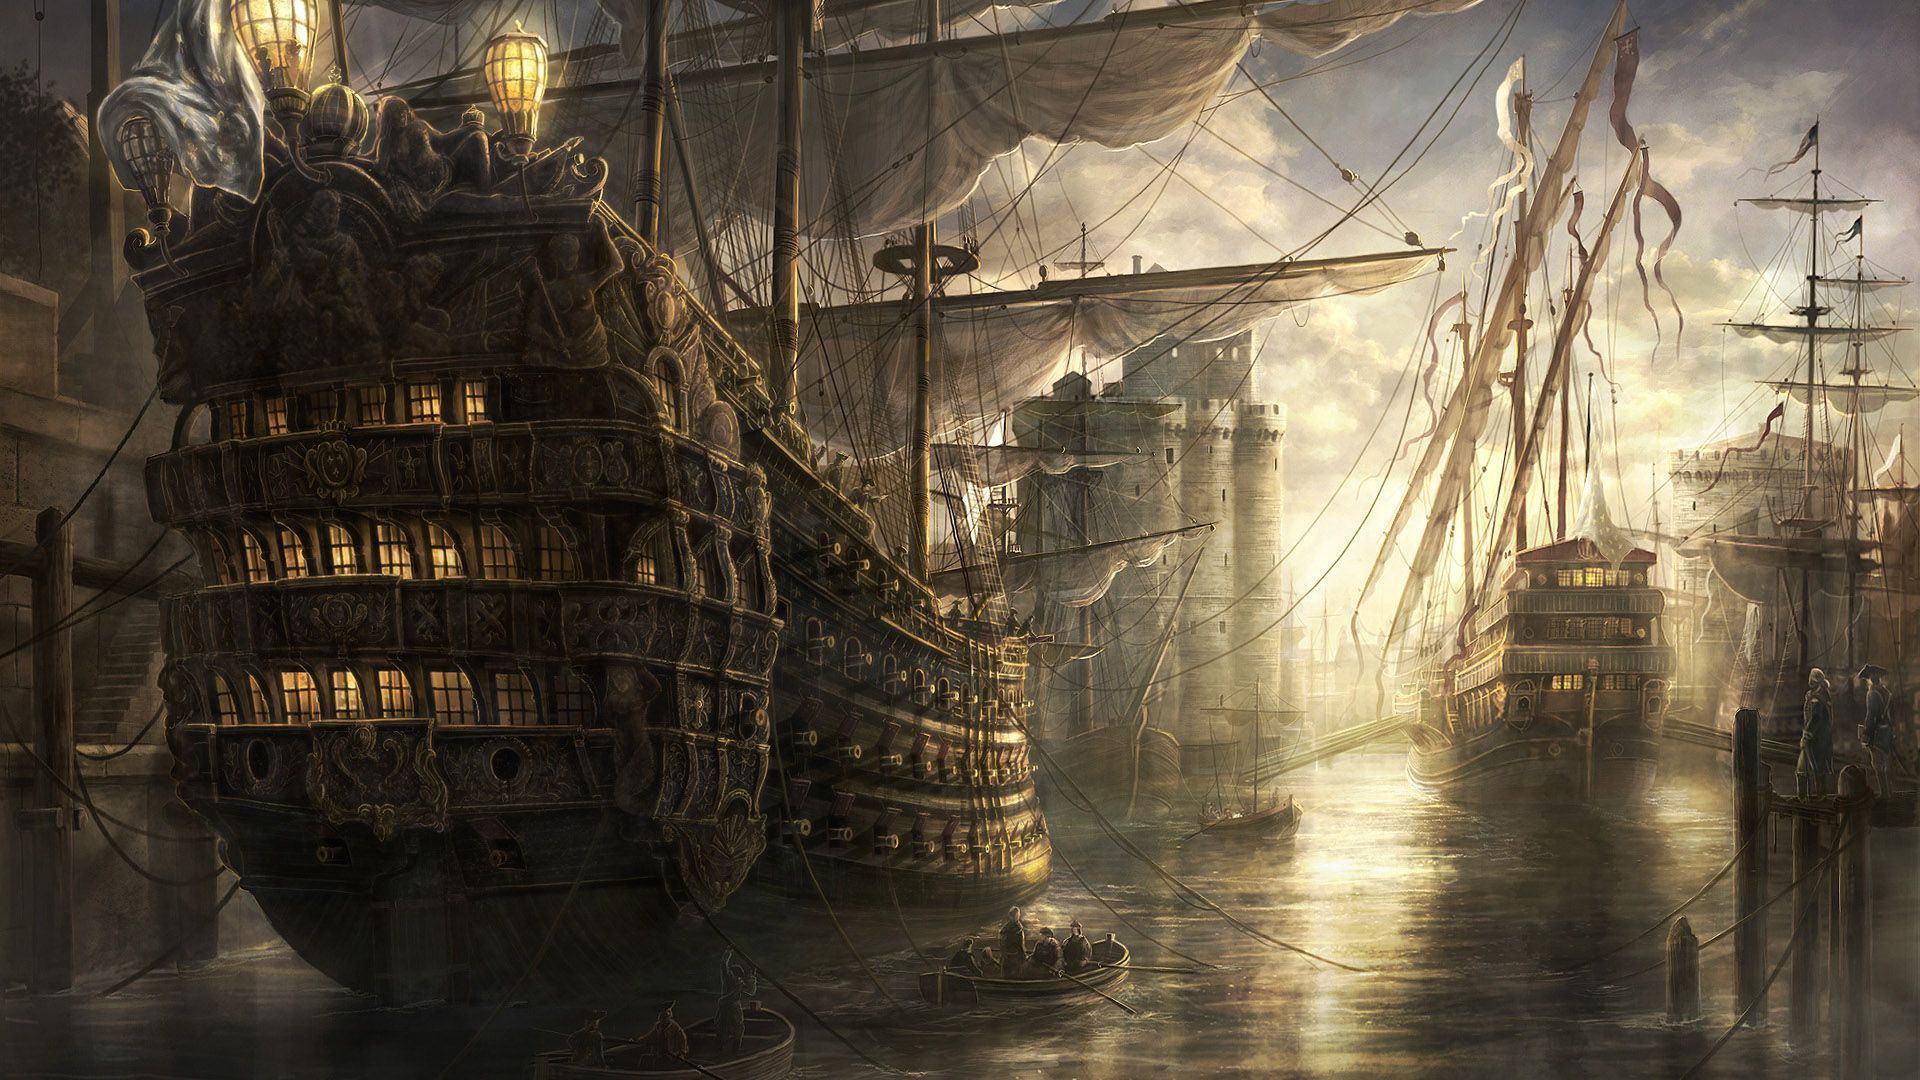 252 Ship HD Wallpapers | Backgrounds - Wallpaper Abyss